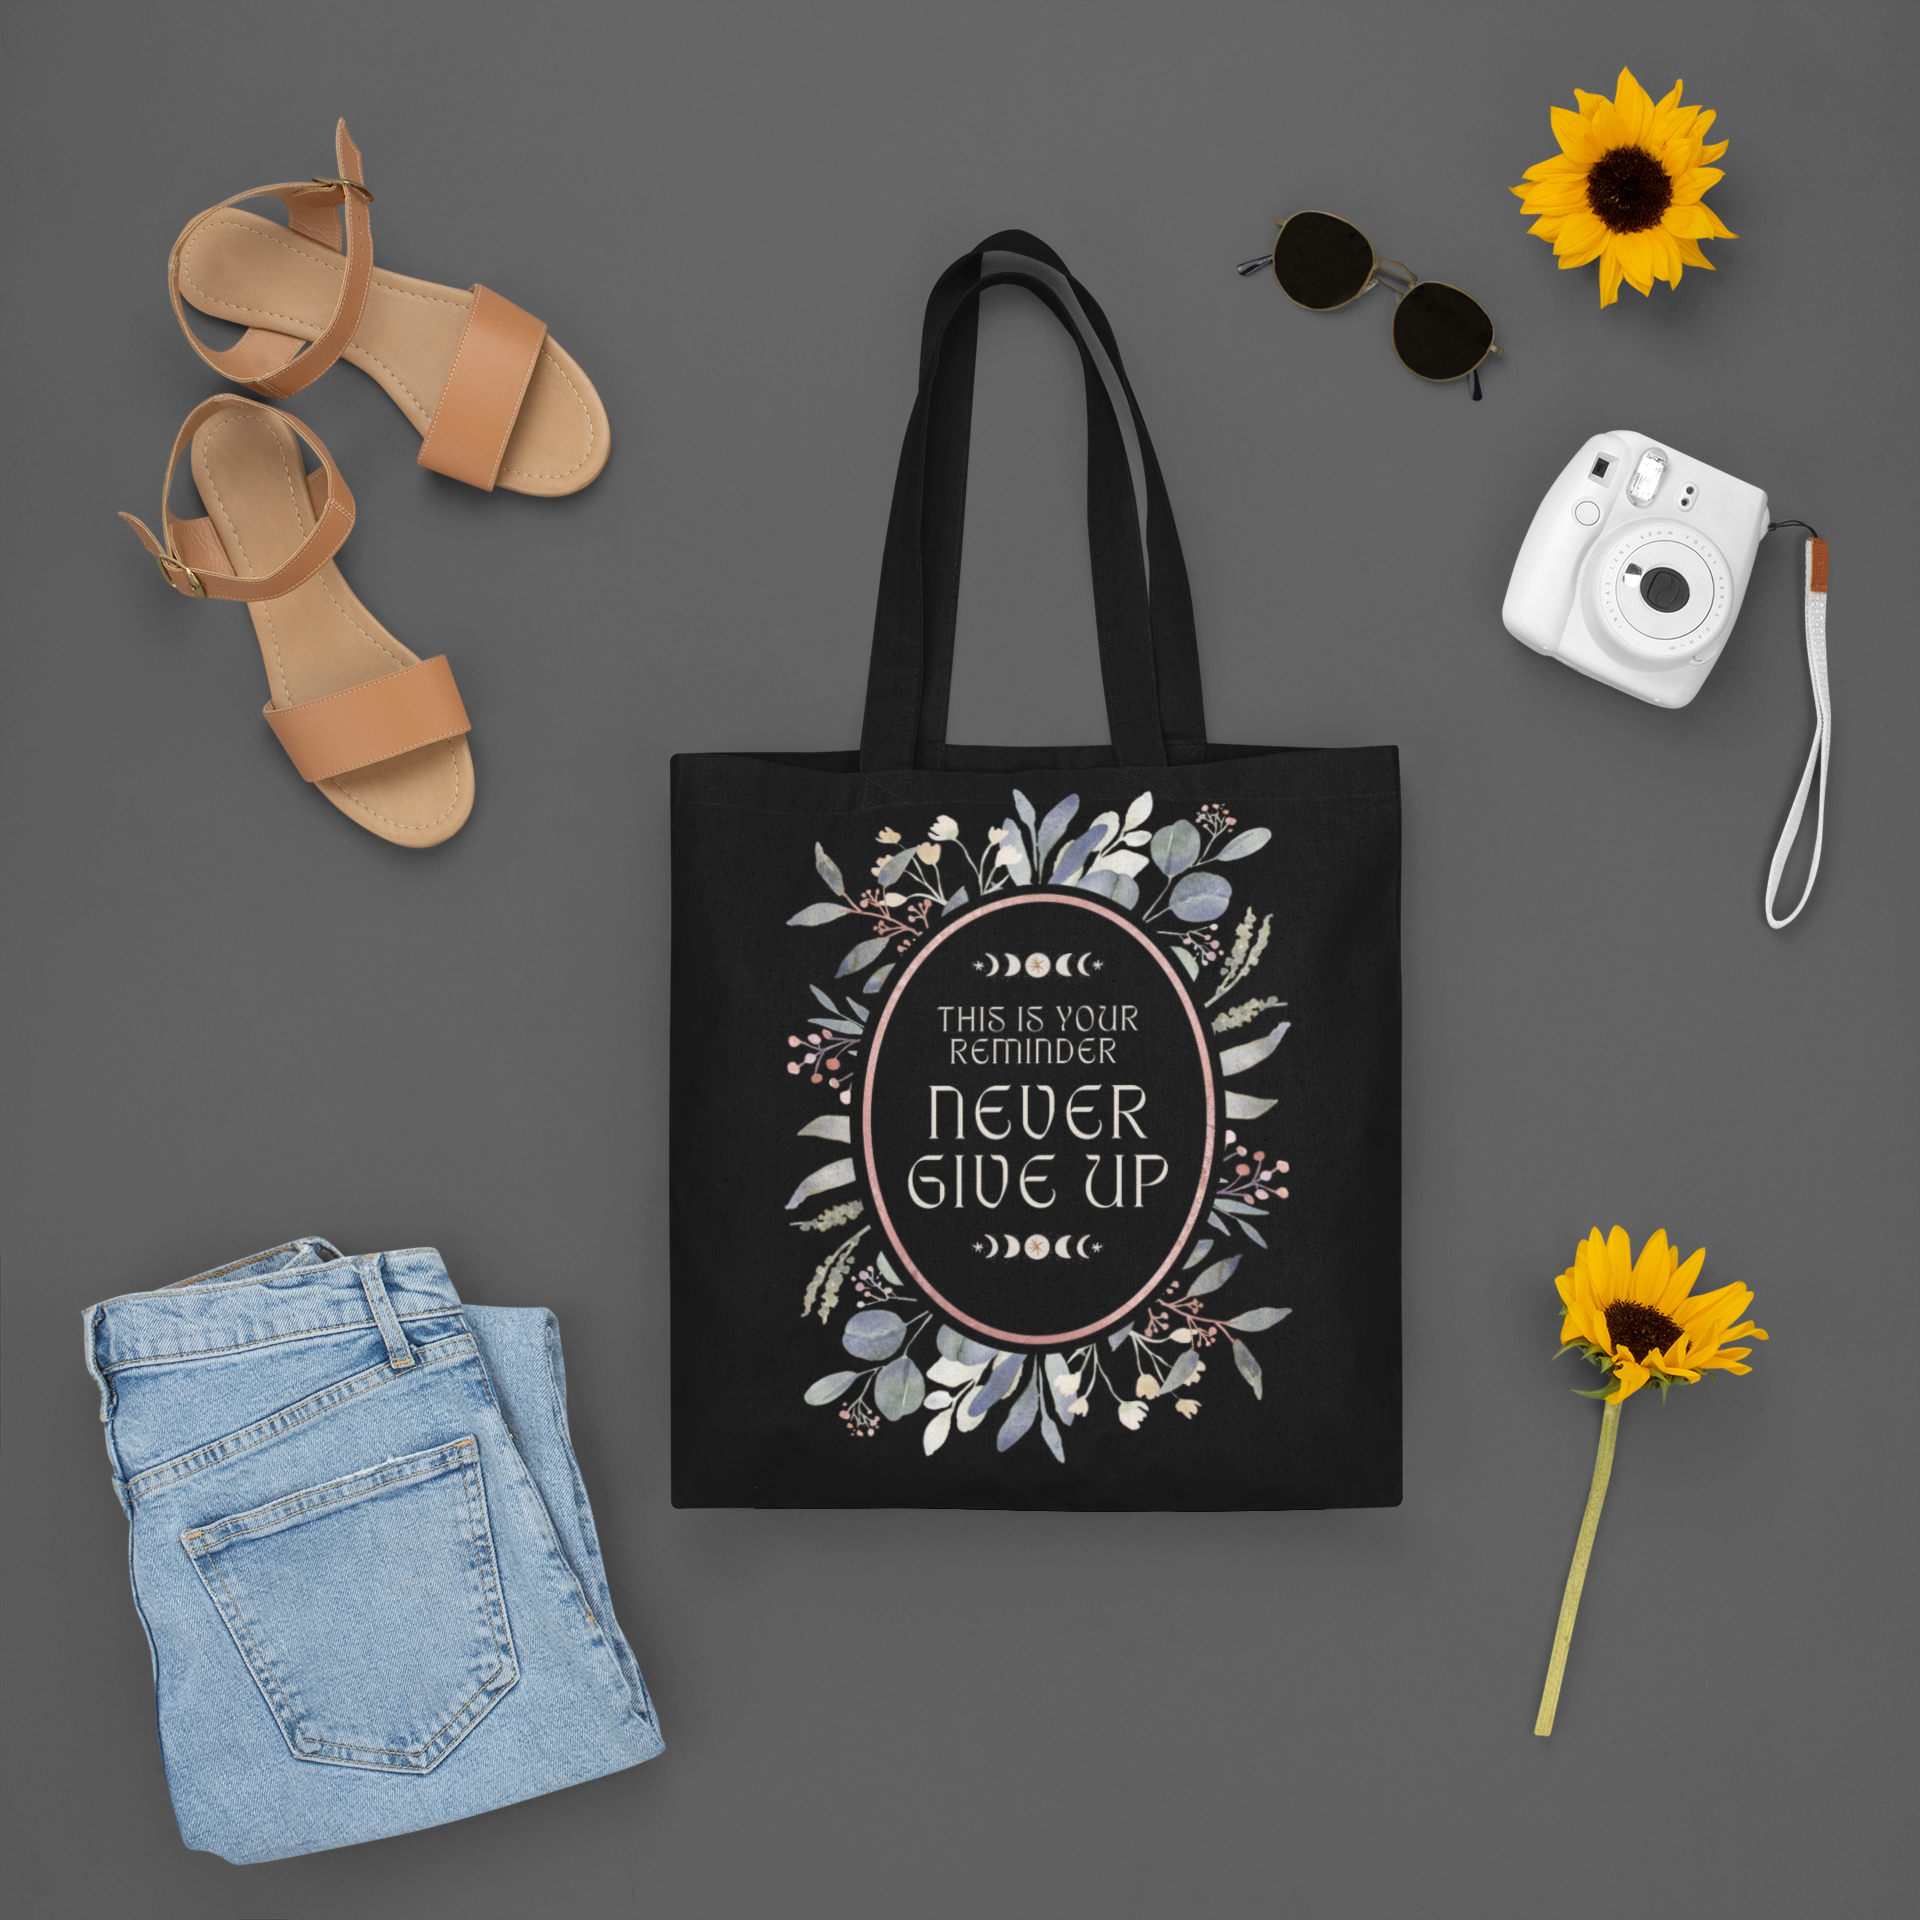 tote-bag-mockup-featuring-a-girly-spring-outfit-m1642.png